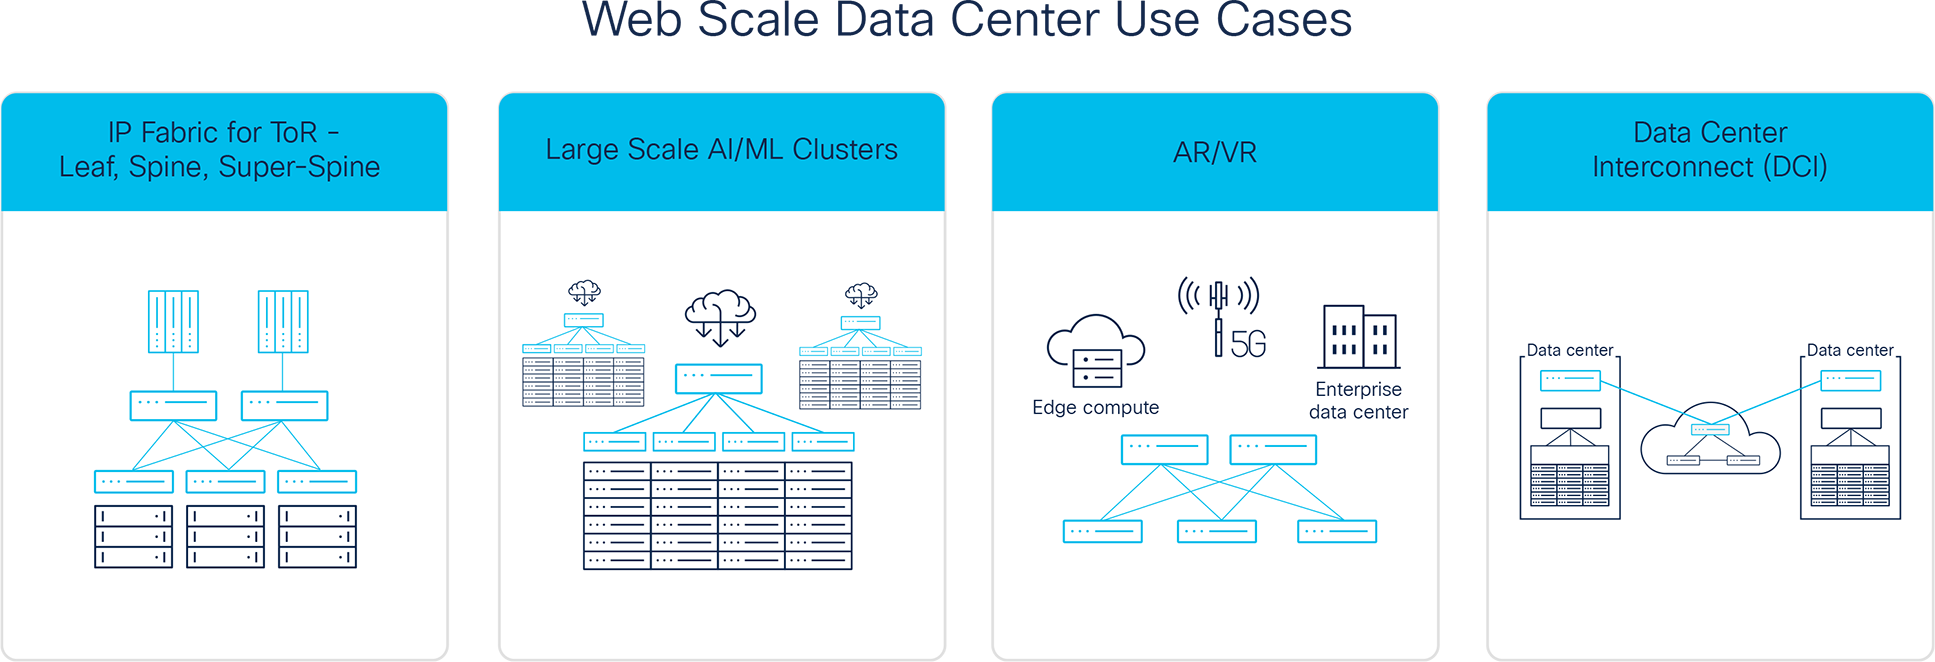 Mass Scale Infrastructure for Cloud for a variety of network use cases